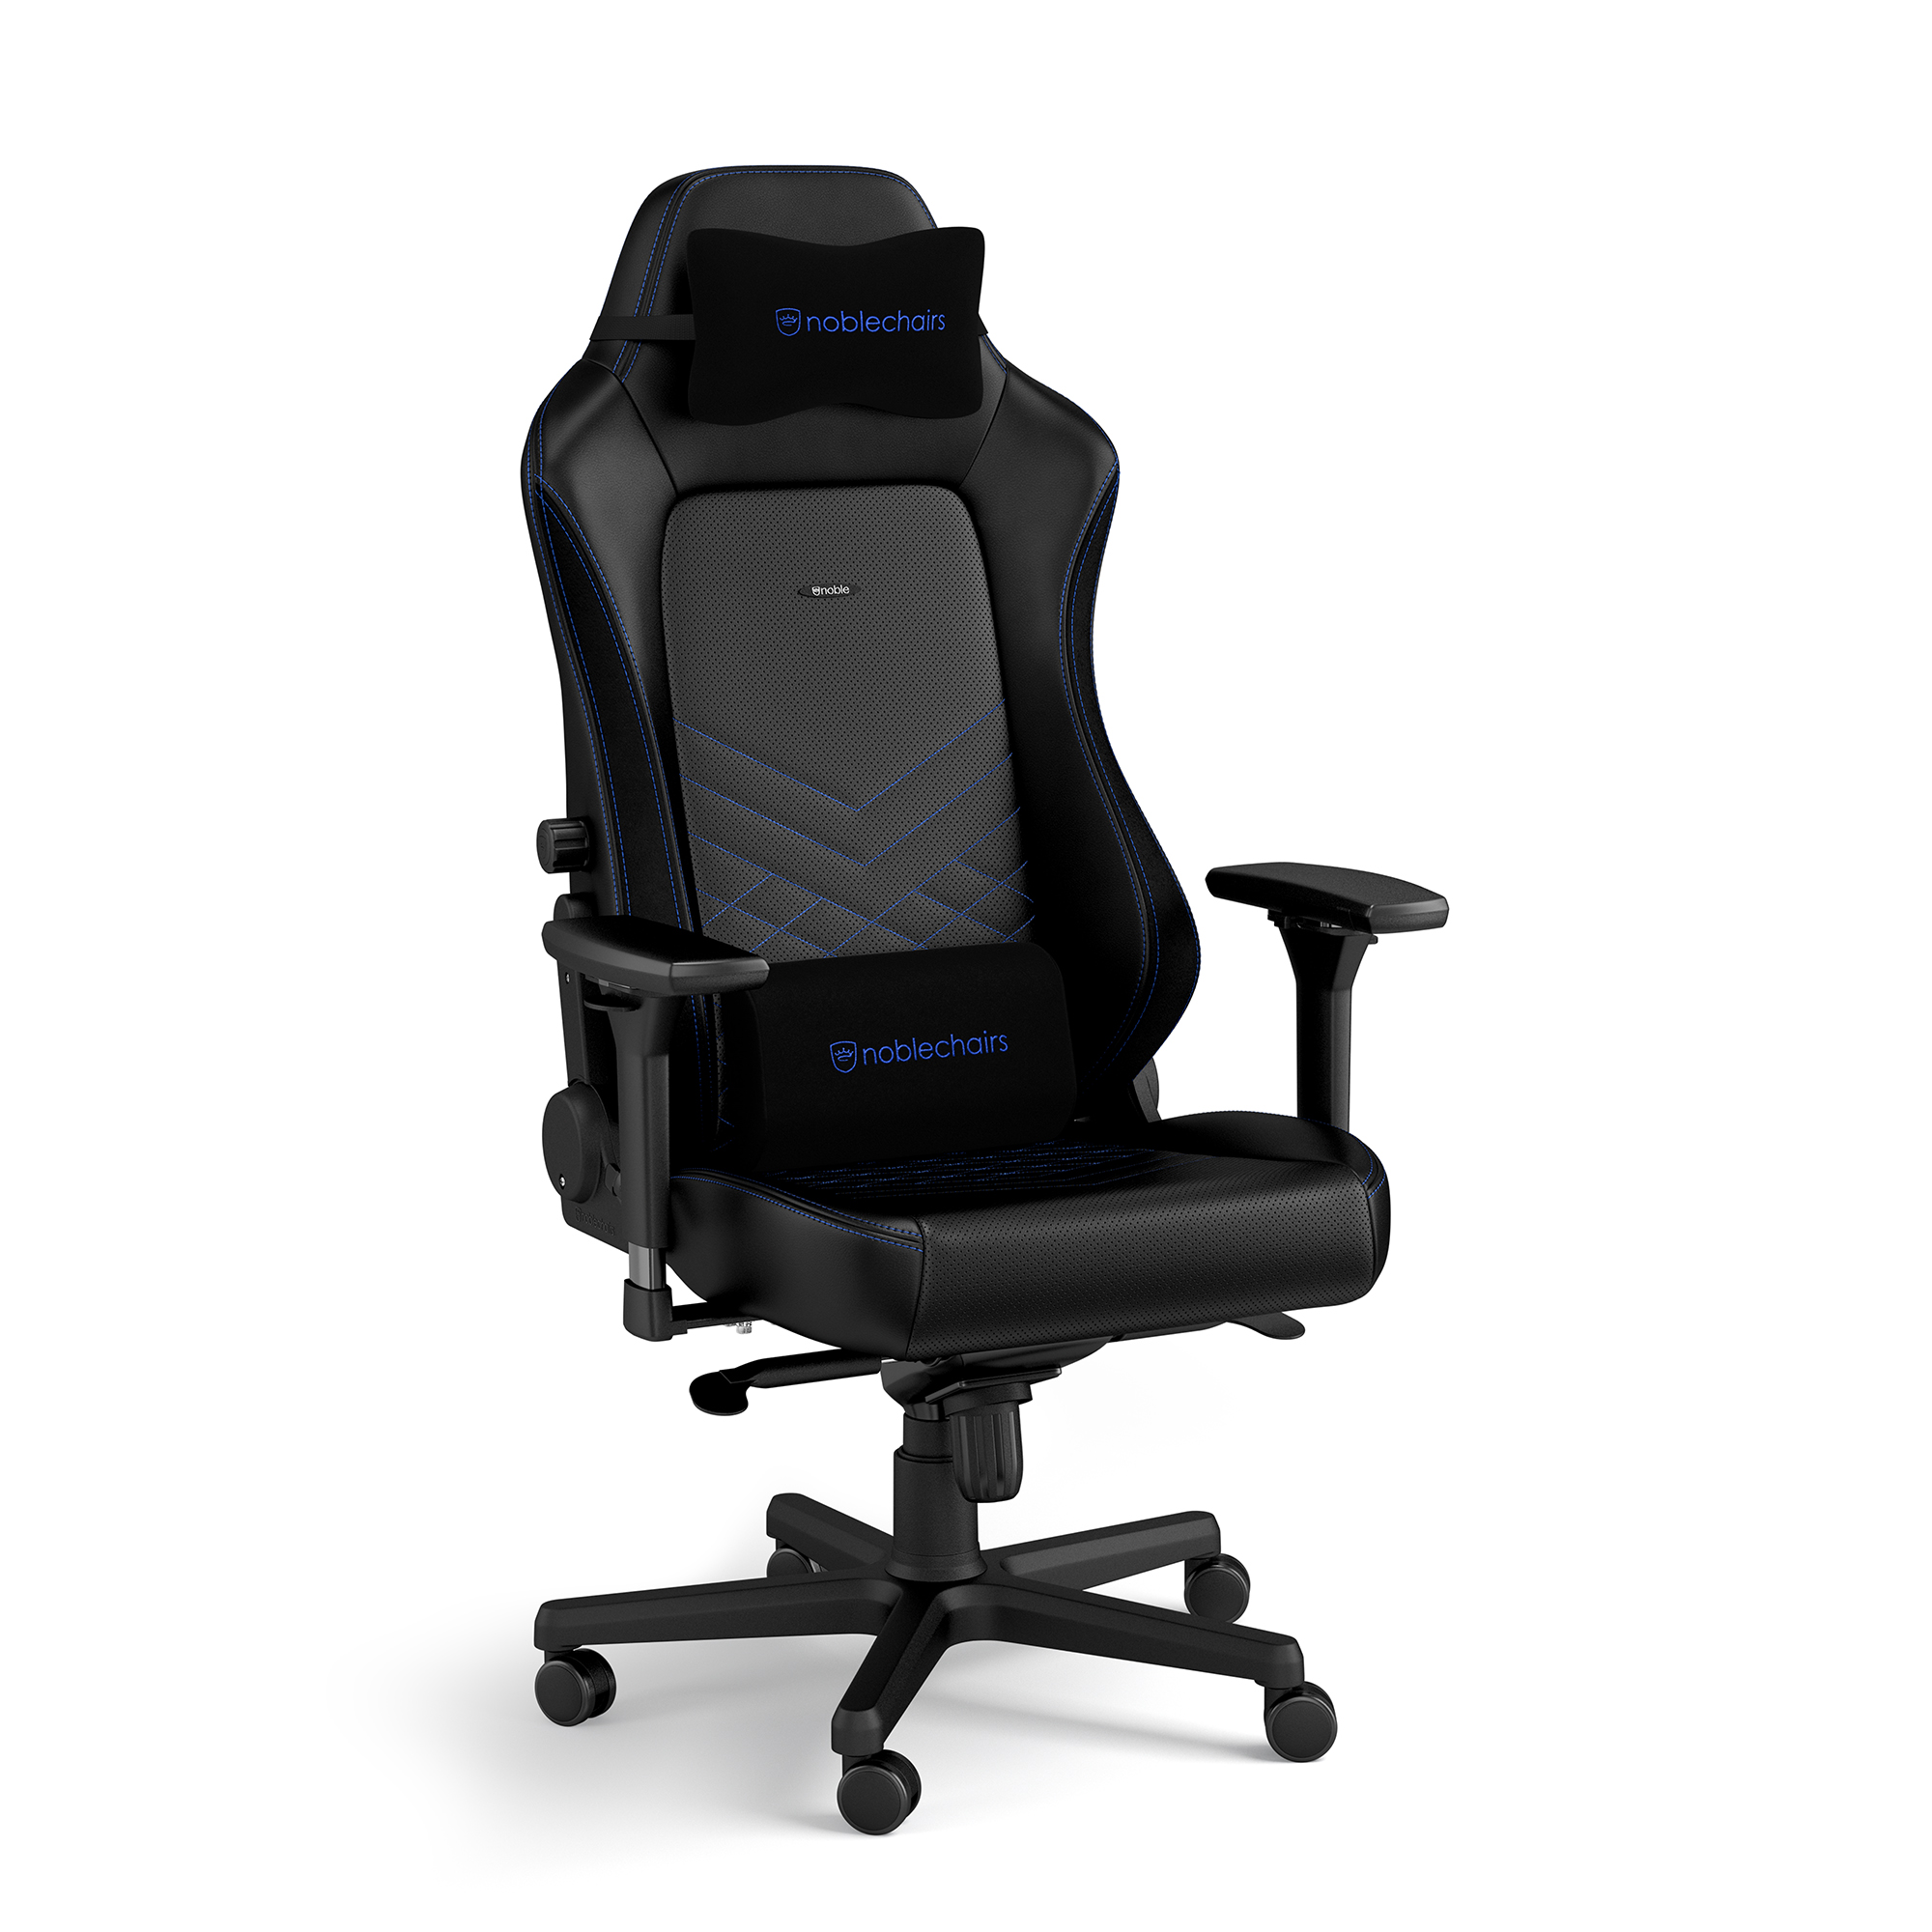 noblechairs - noblechairs HERO Gaming Chair - Black/Blue